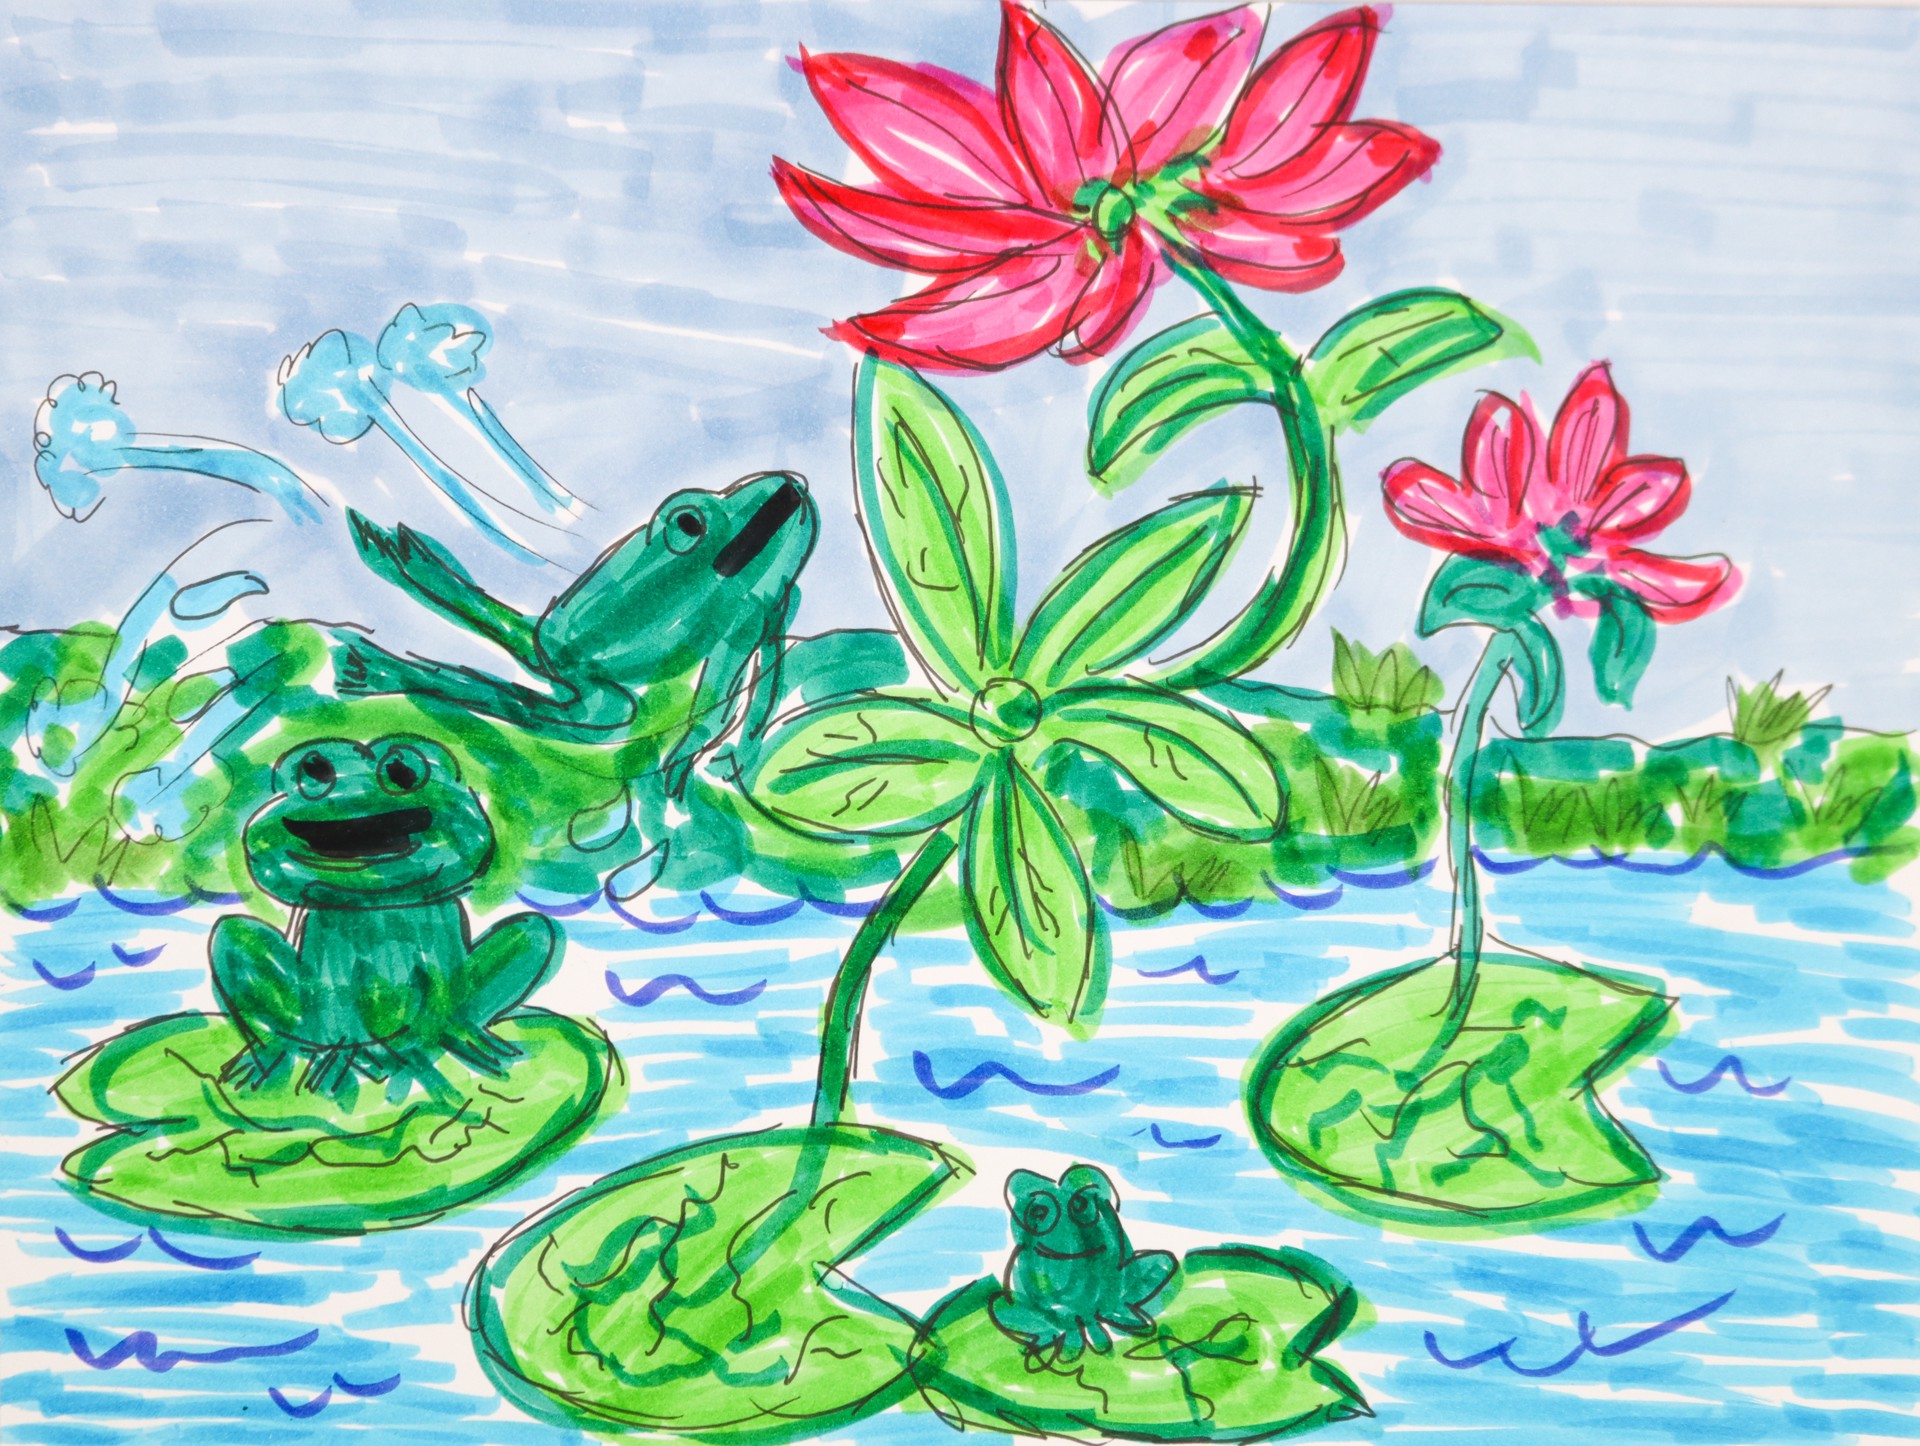 The Frogs in the Lake by Nonja Tiller